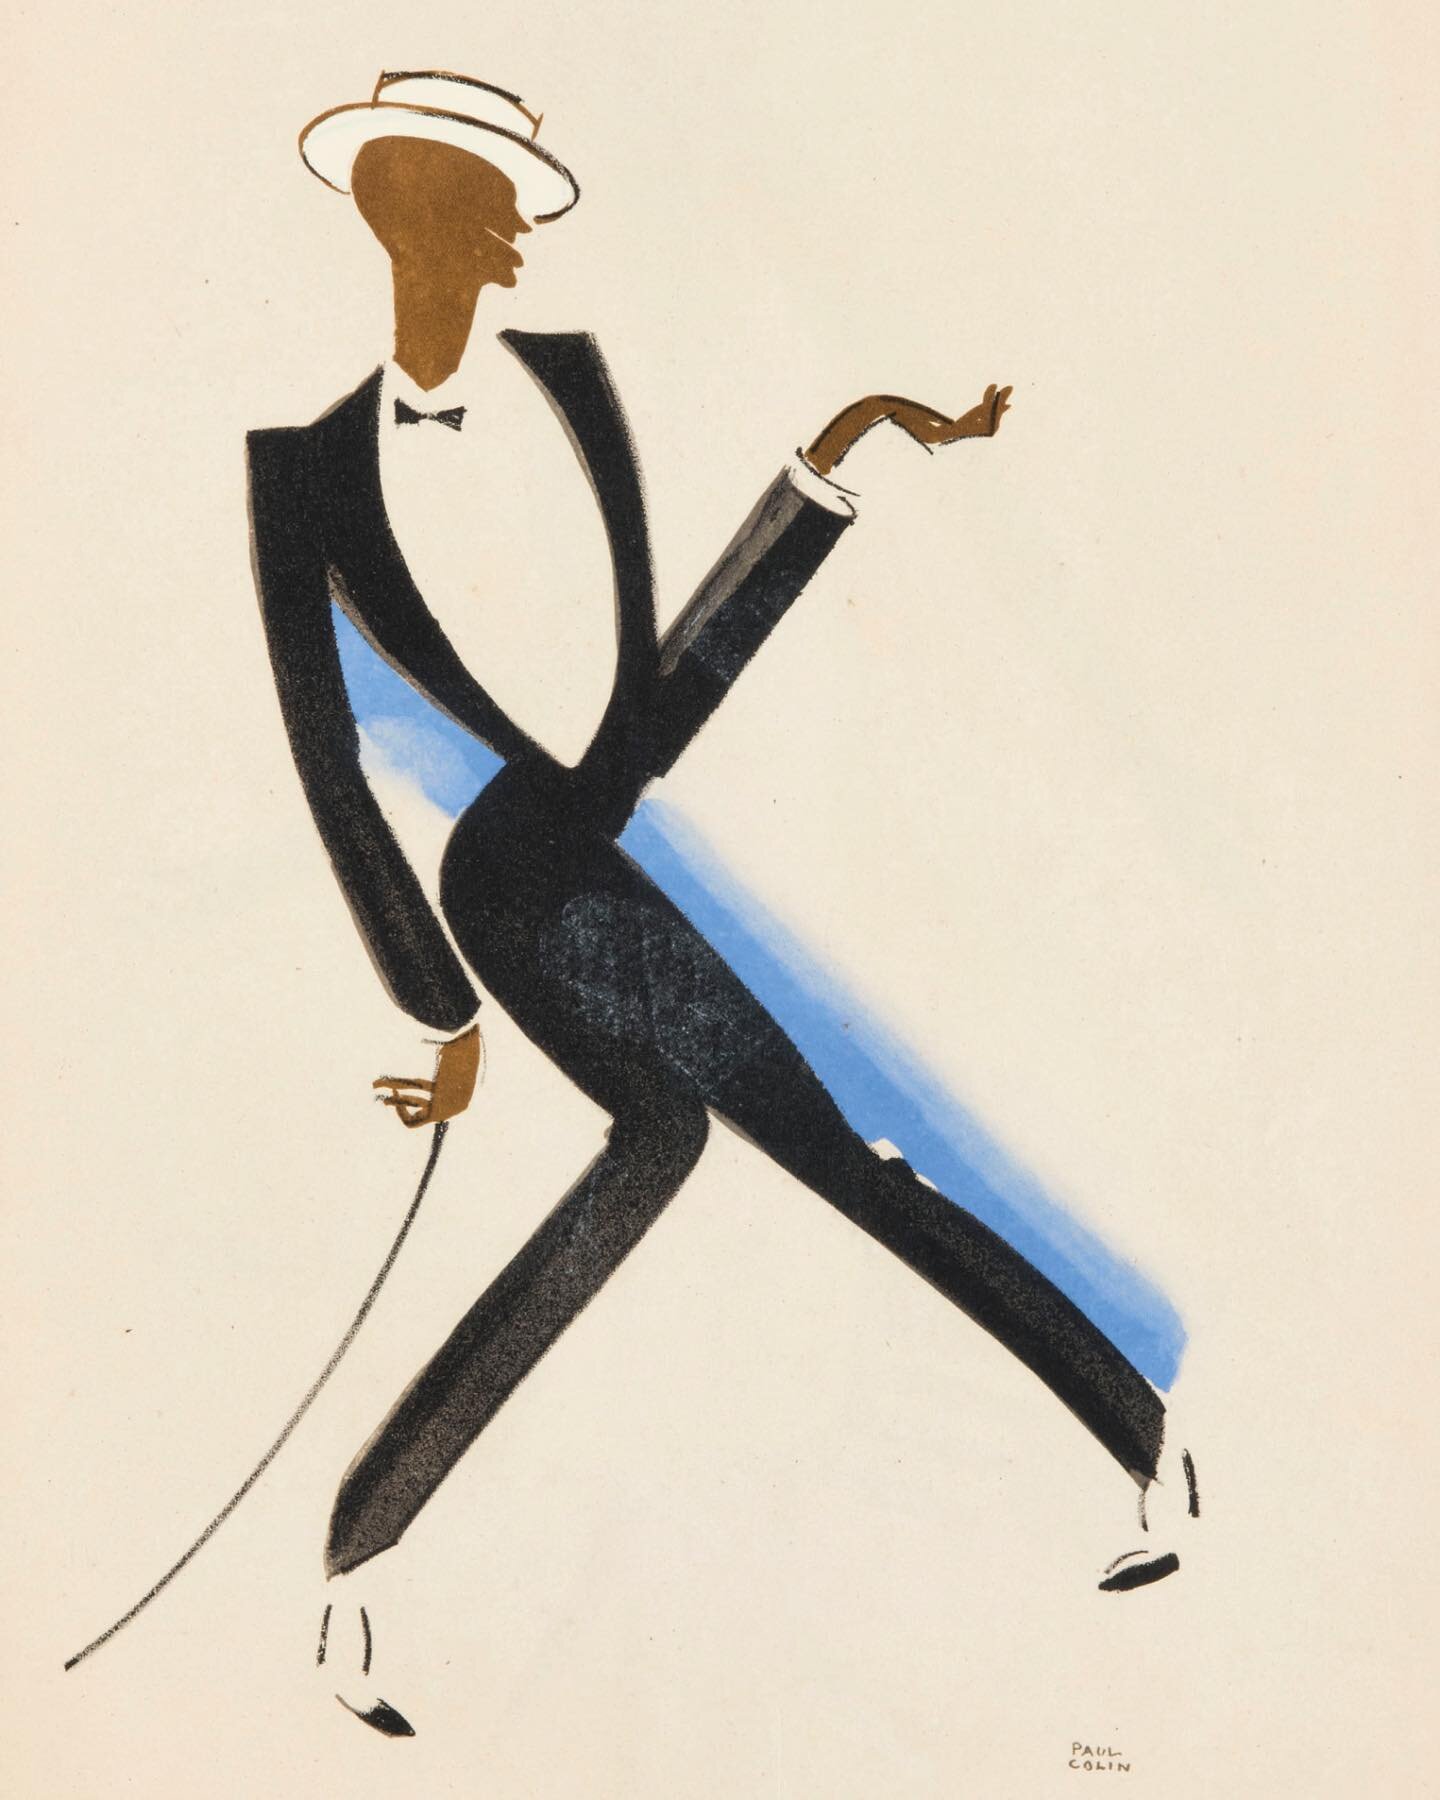 Selection from Paul Colin&rsquo;s 1927-1929 set of lithographs titled Le Tumulte Noir | these were originally hand colored stencils known as pochoir | the series was inspired by the 1925 show of Harlem entertainers in Paris le Revue N&egrave;gre star